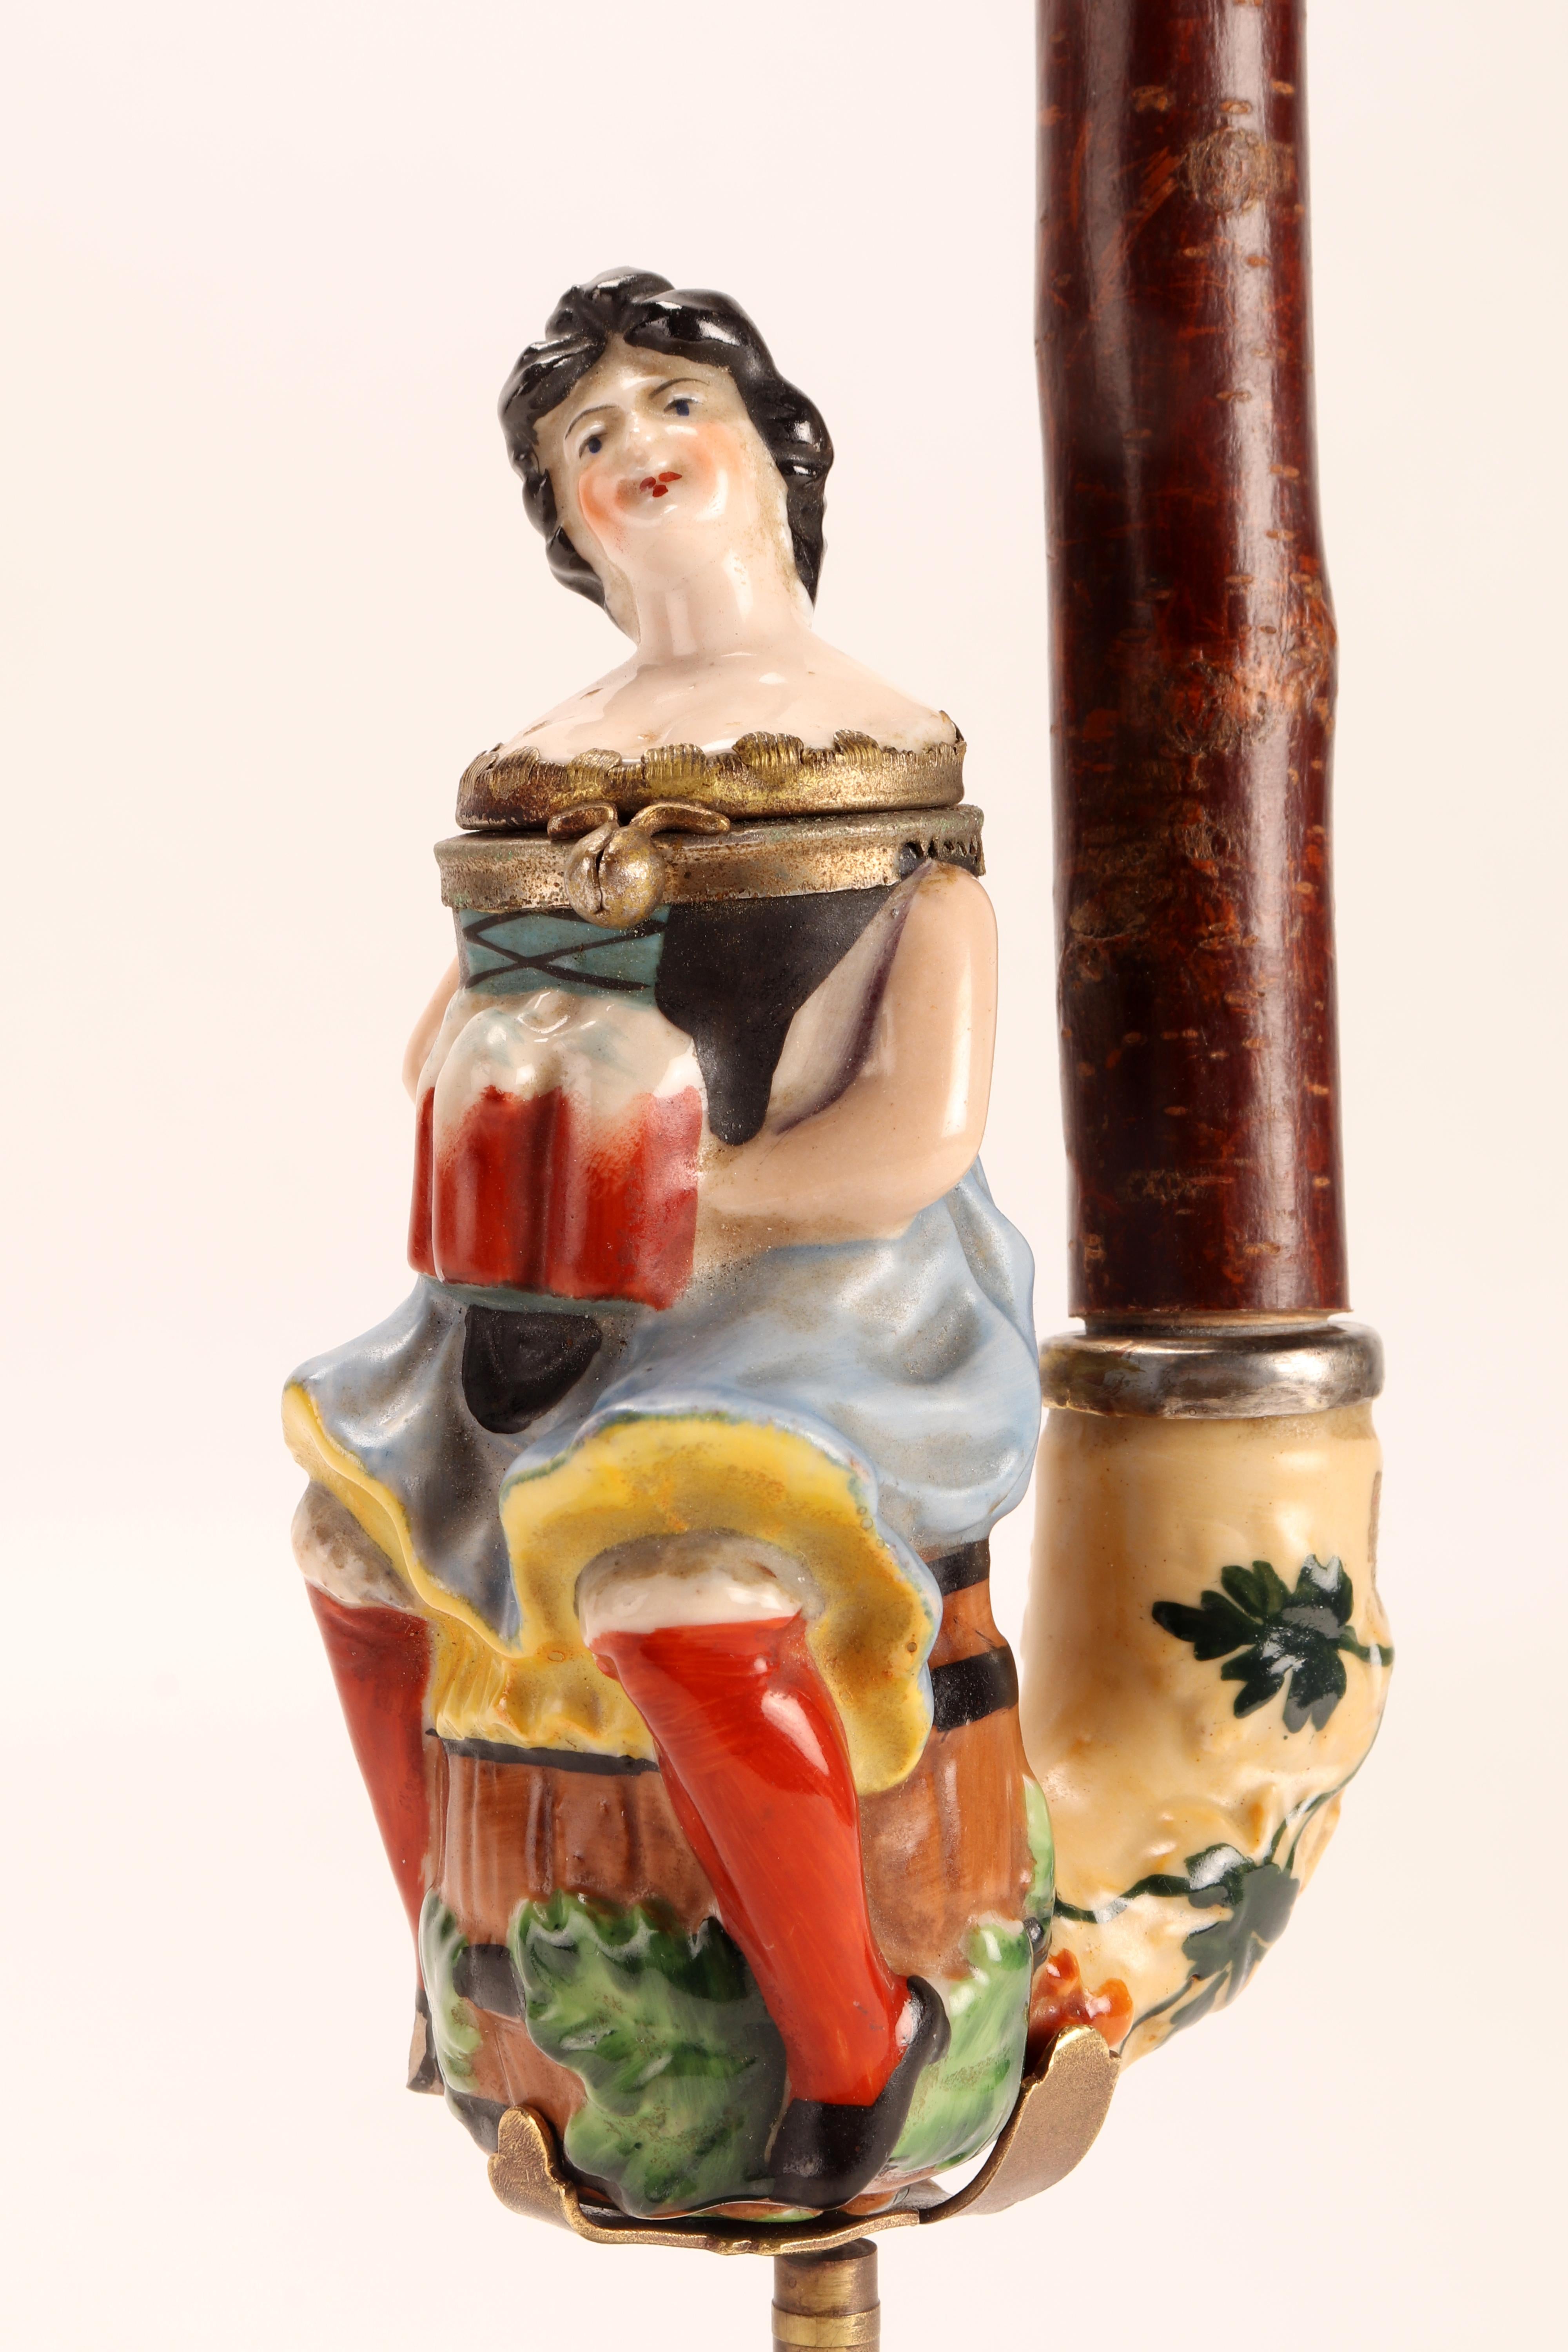 Painted porcelain pipe, with opening stove, depicting a waitress, sitting on a beer barrel, holding three mugs full of beer, ready to be served. The amber mouthpiece is connected to the stove with a connecting branch. Germany circa 1880. (The stand